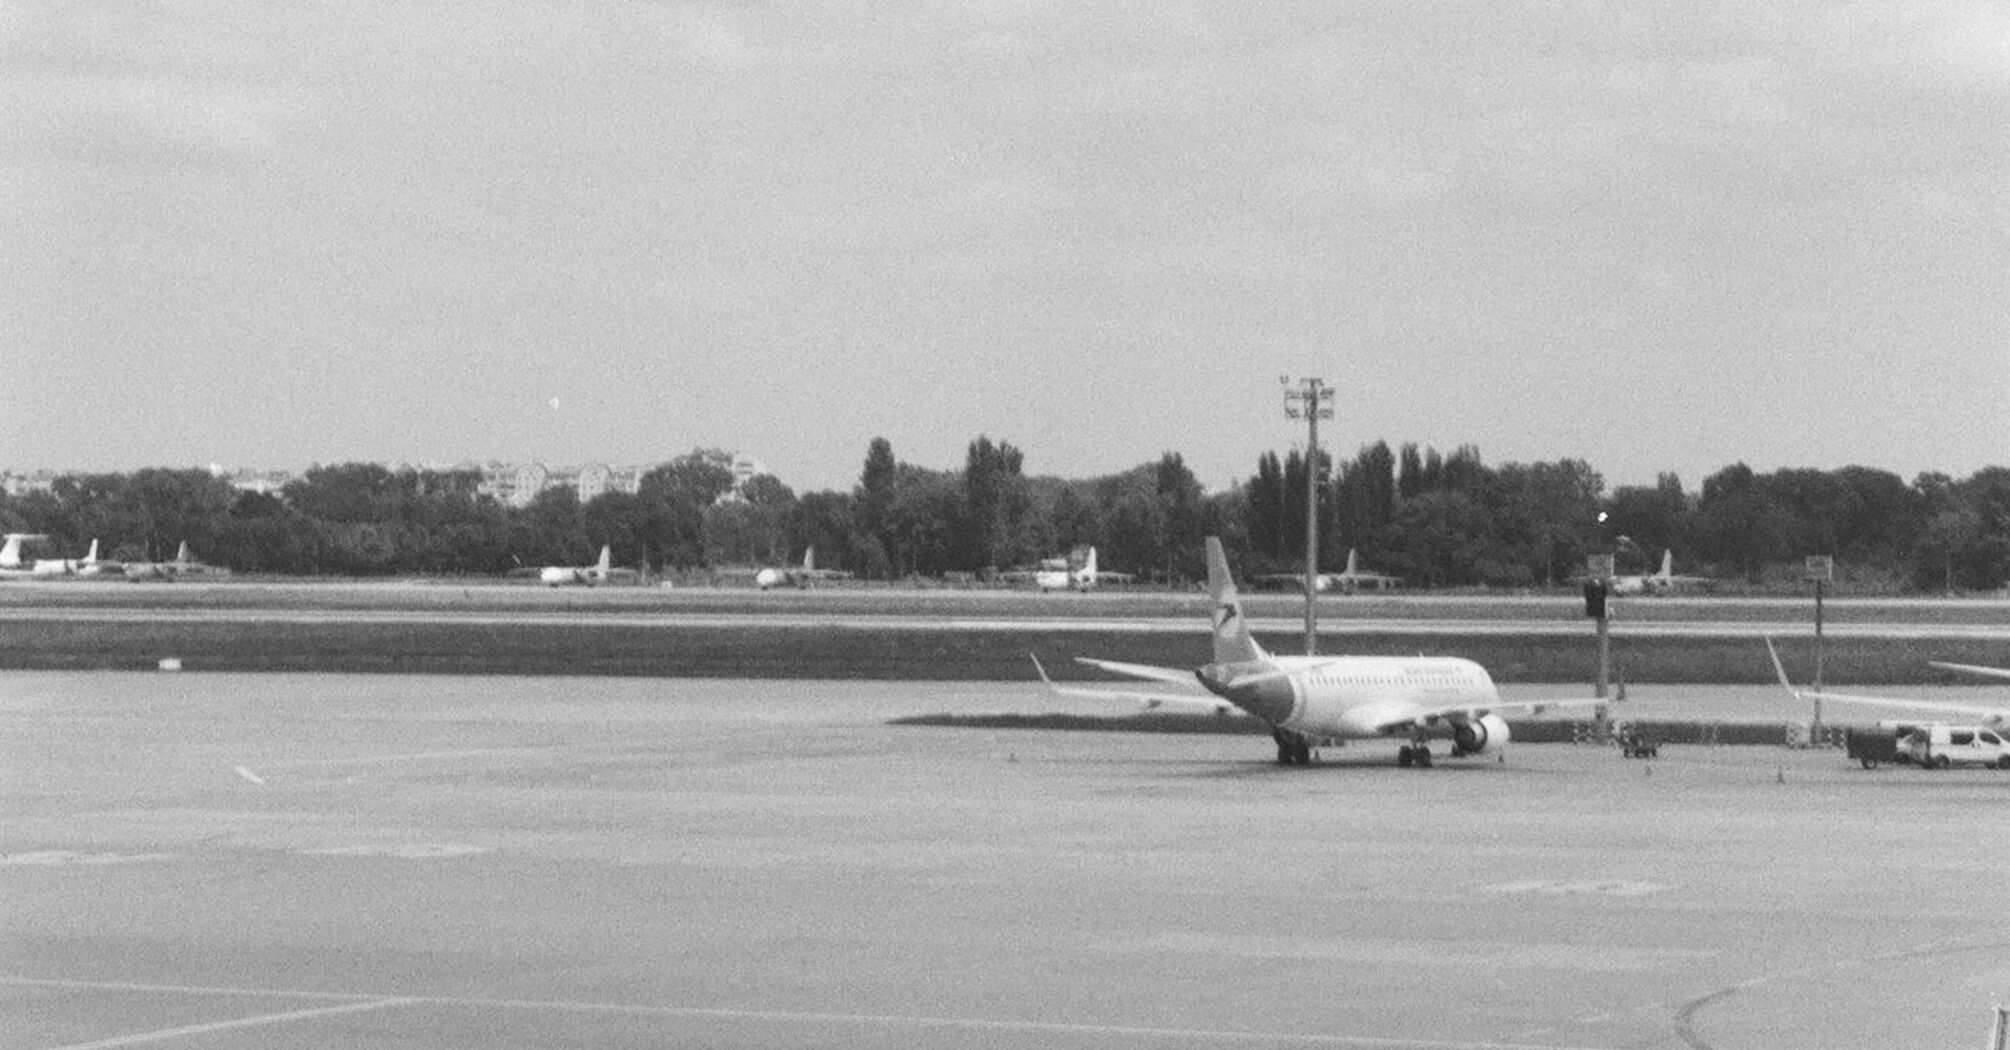 A black and white photo of an Boryspil airport